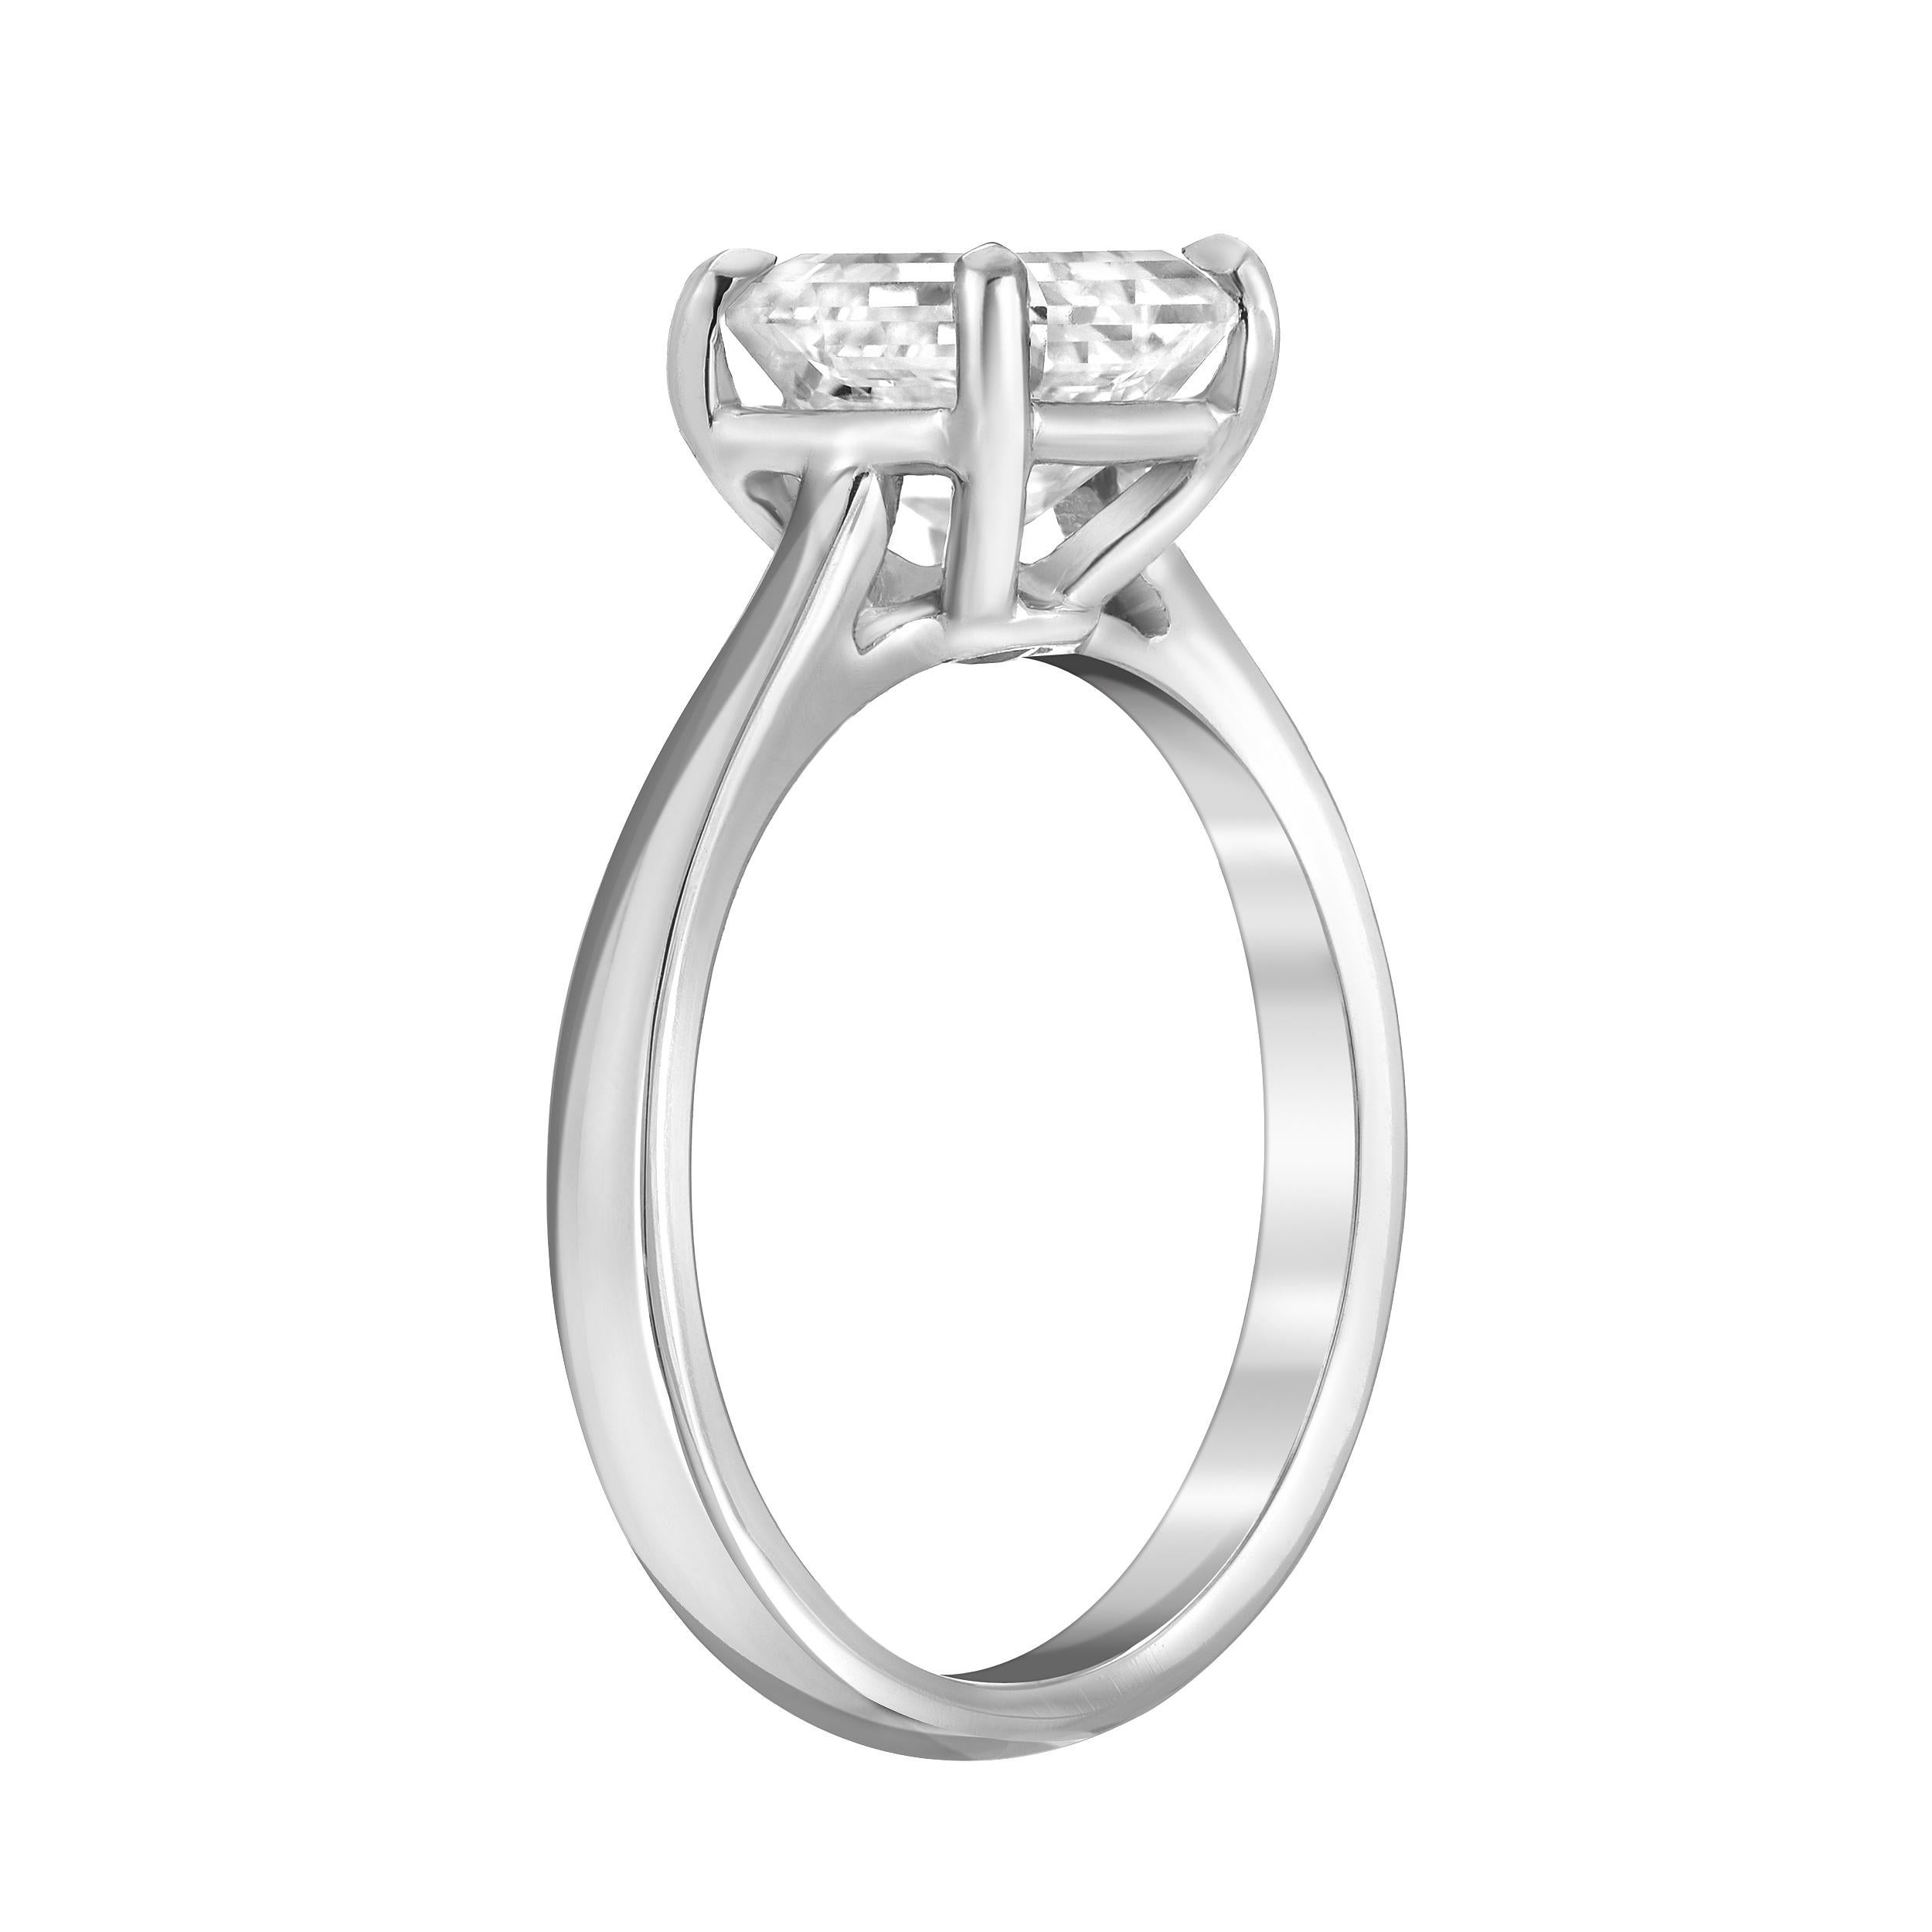 Asscher Cut Platinum Diamond Ring In Excellent Condition For Sale In Los Angeles, CA